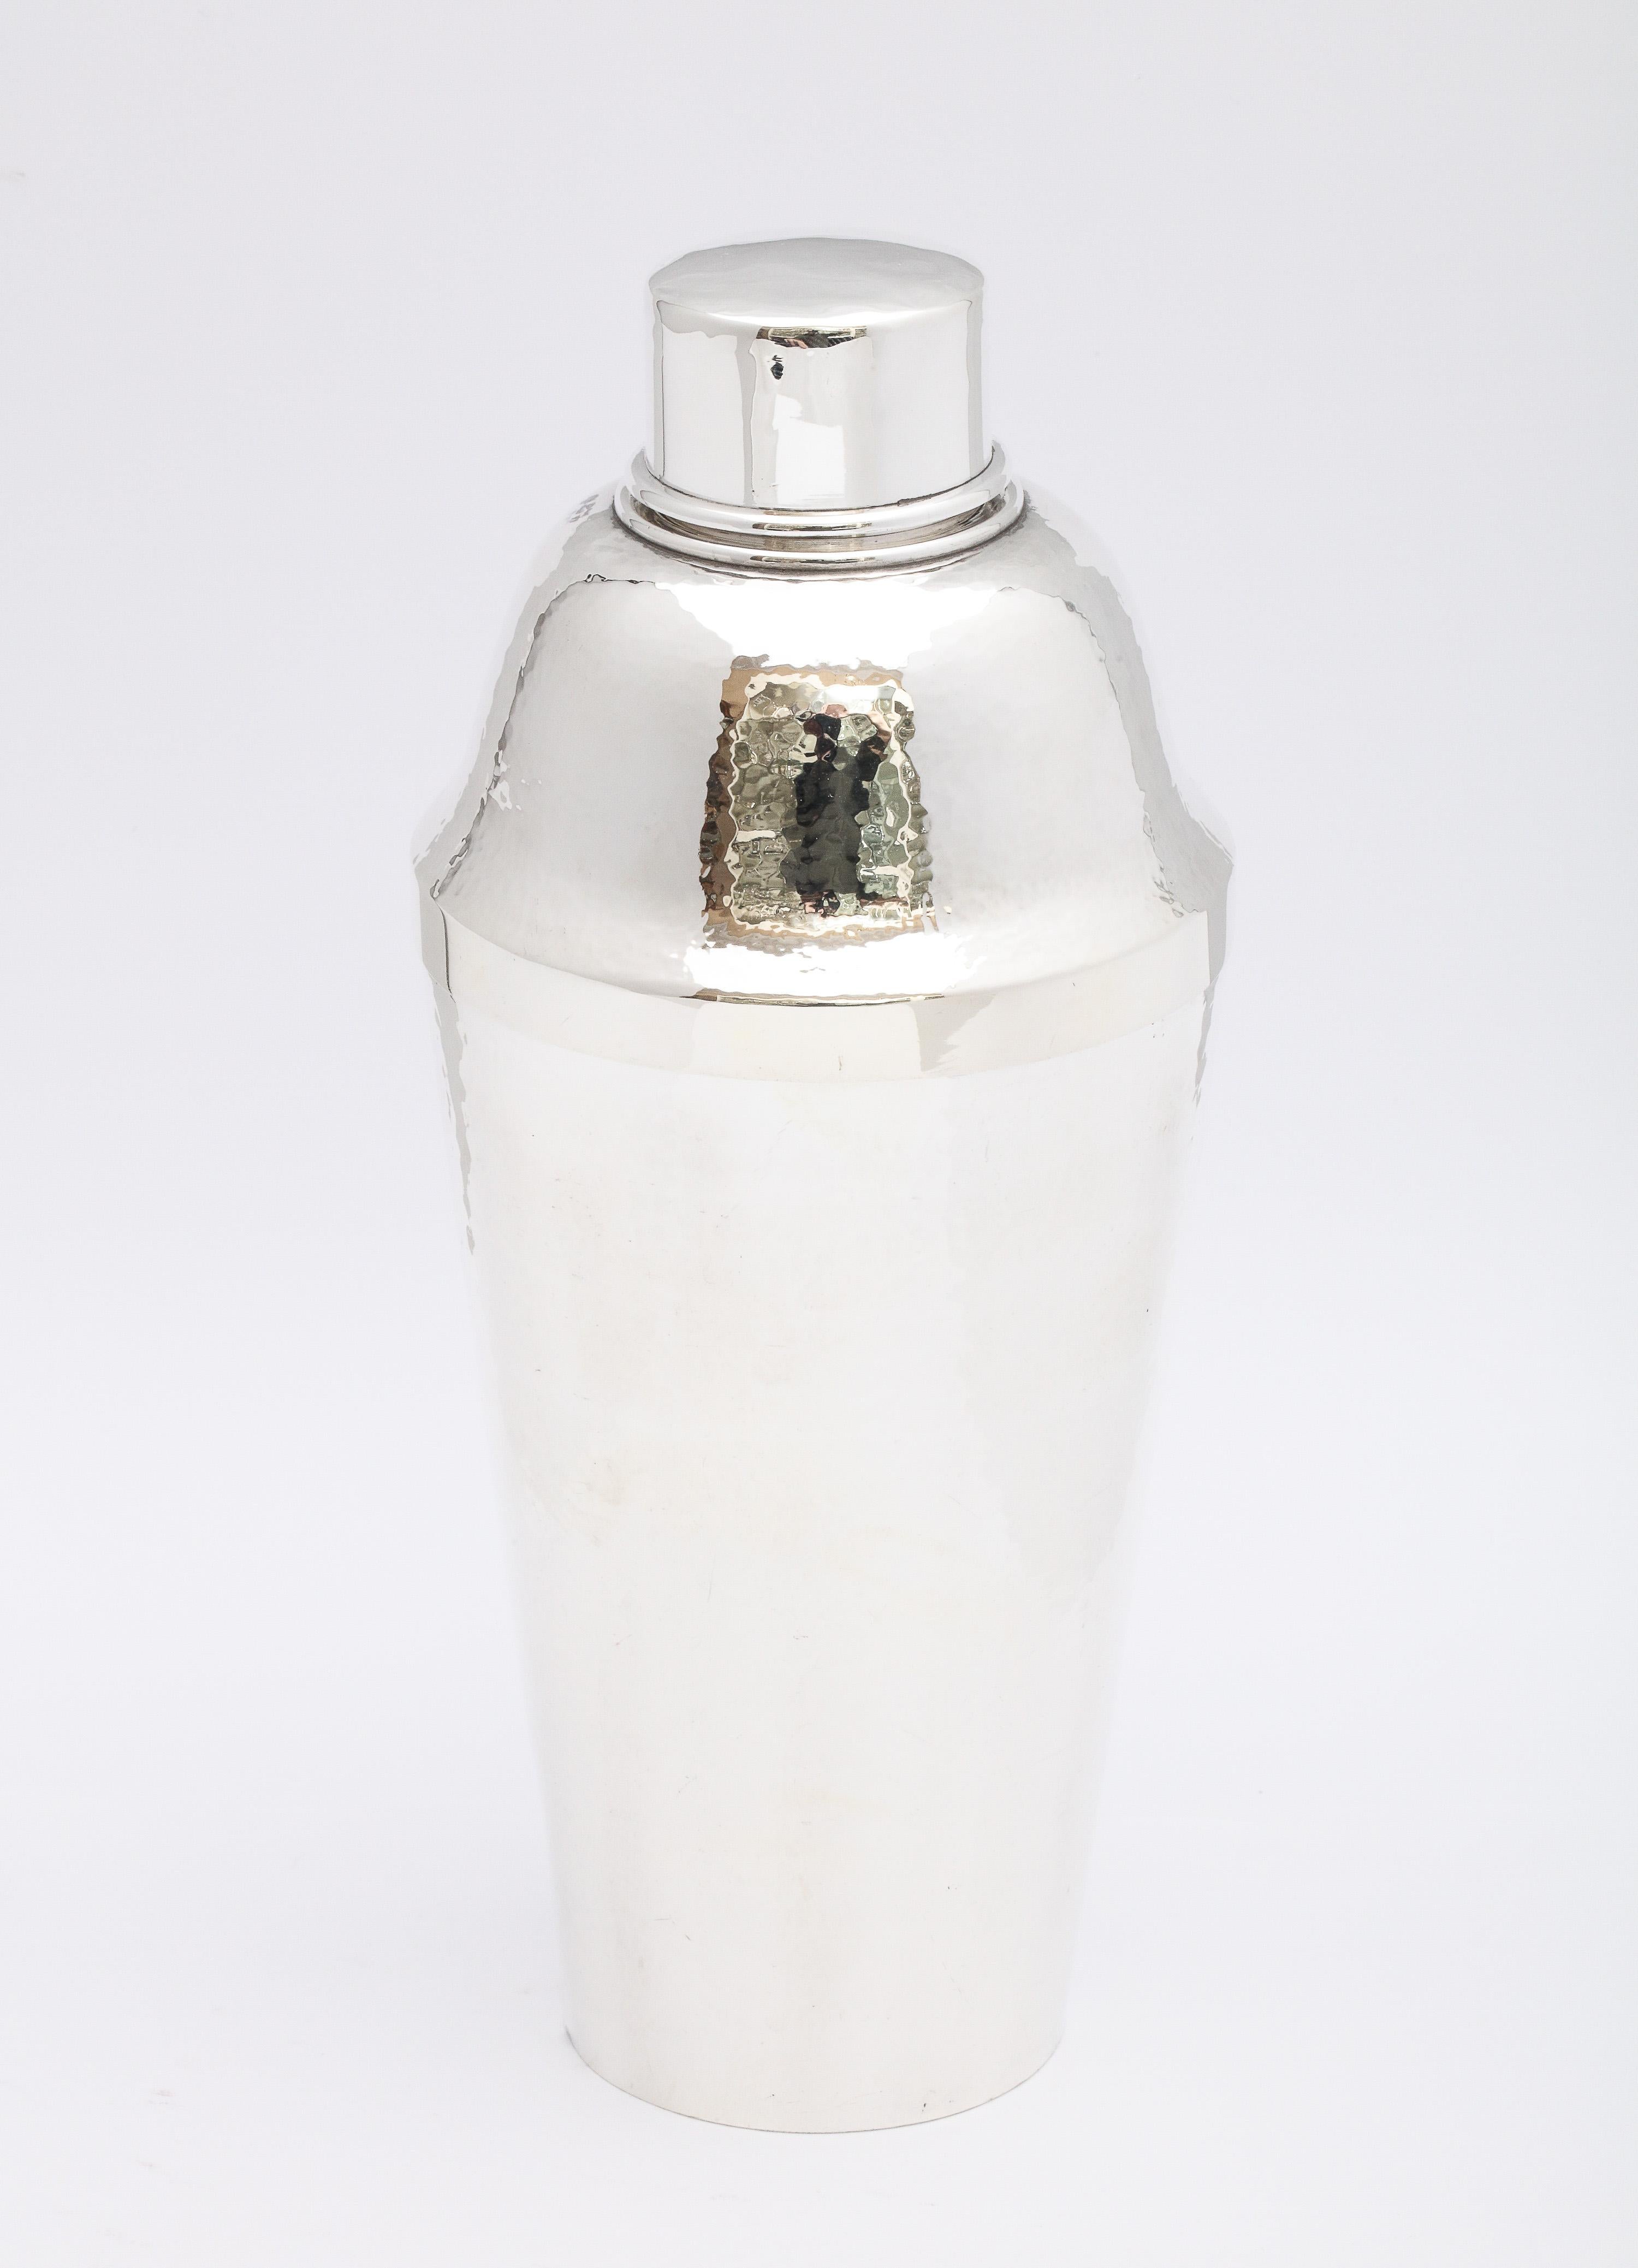 Art Deco, sterling silver (.950) cocktail shaker, Japan, circa 1930s, Suzuyo, maker. The body is lightly hammered; the lid is not hammered. Measures 9 1/4 inches high x 4 inches diameter (at widest point). Weighs 13.705 troy ounces. Dark spots in